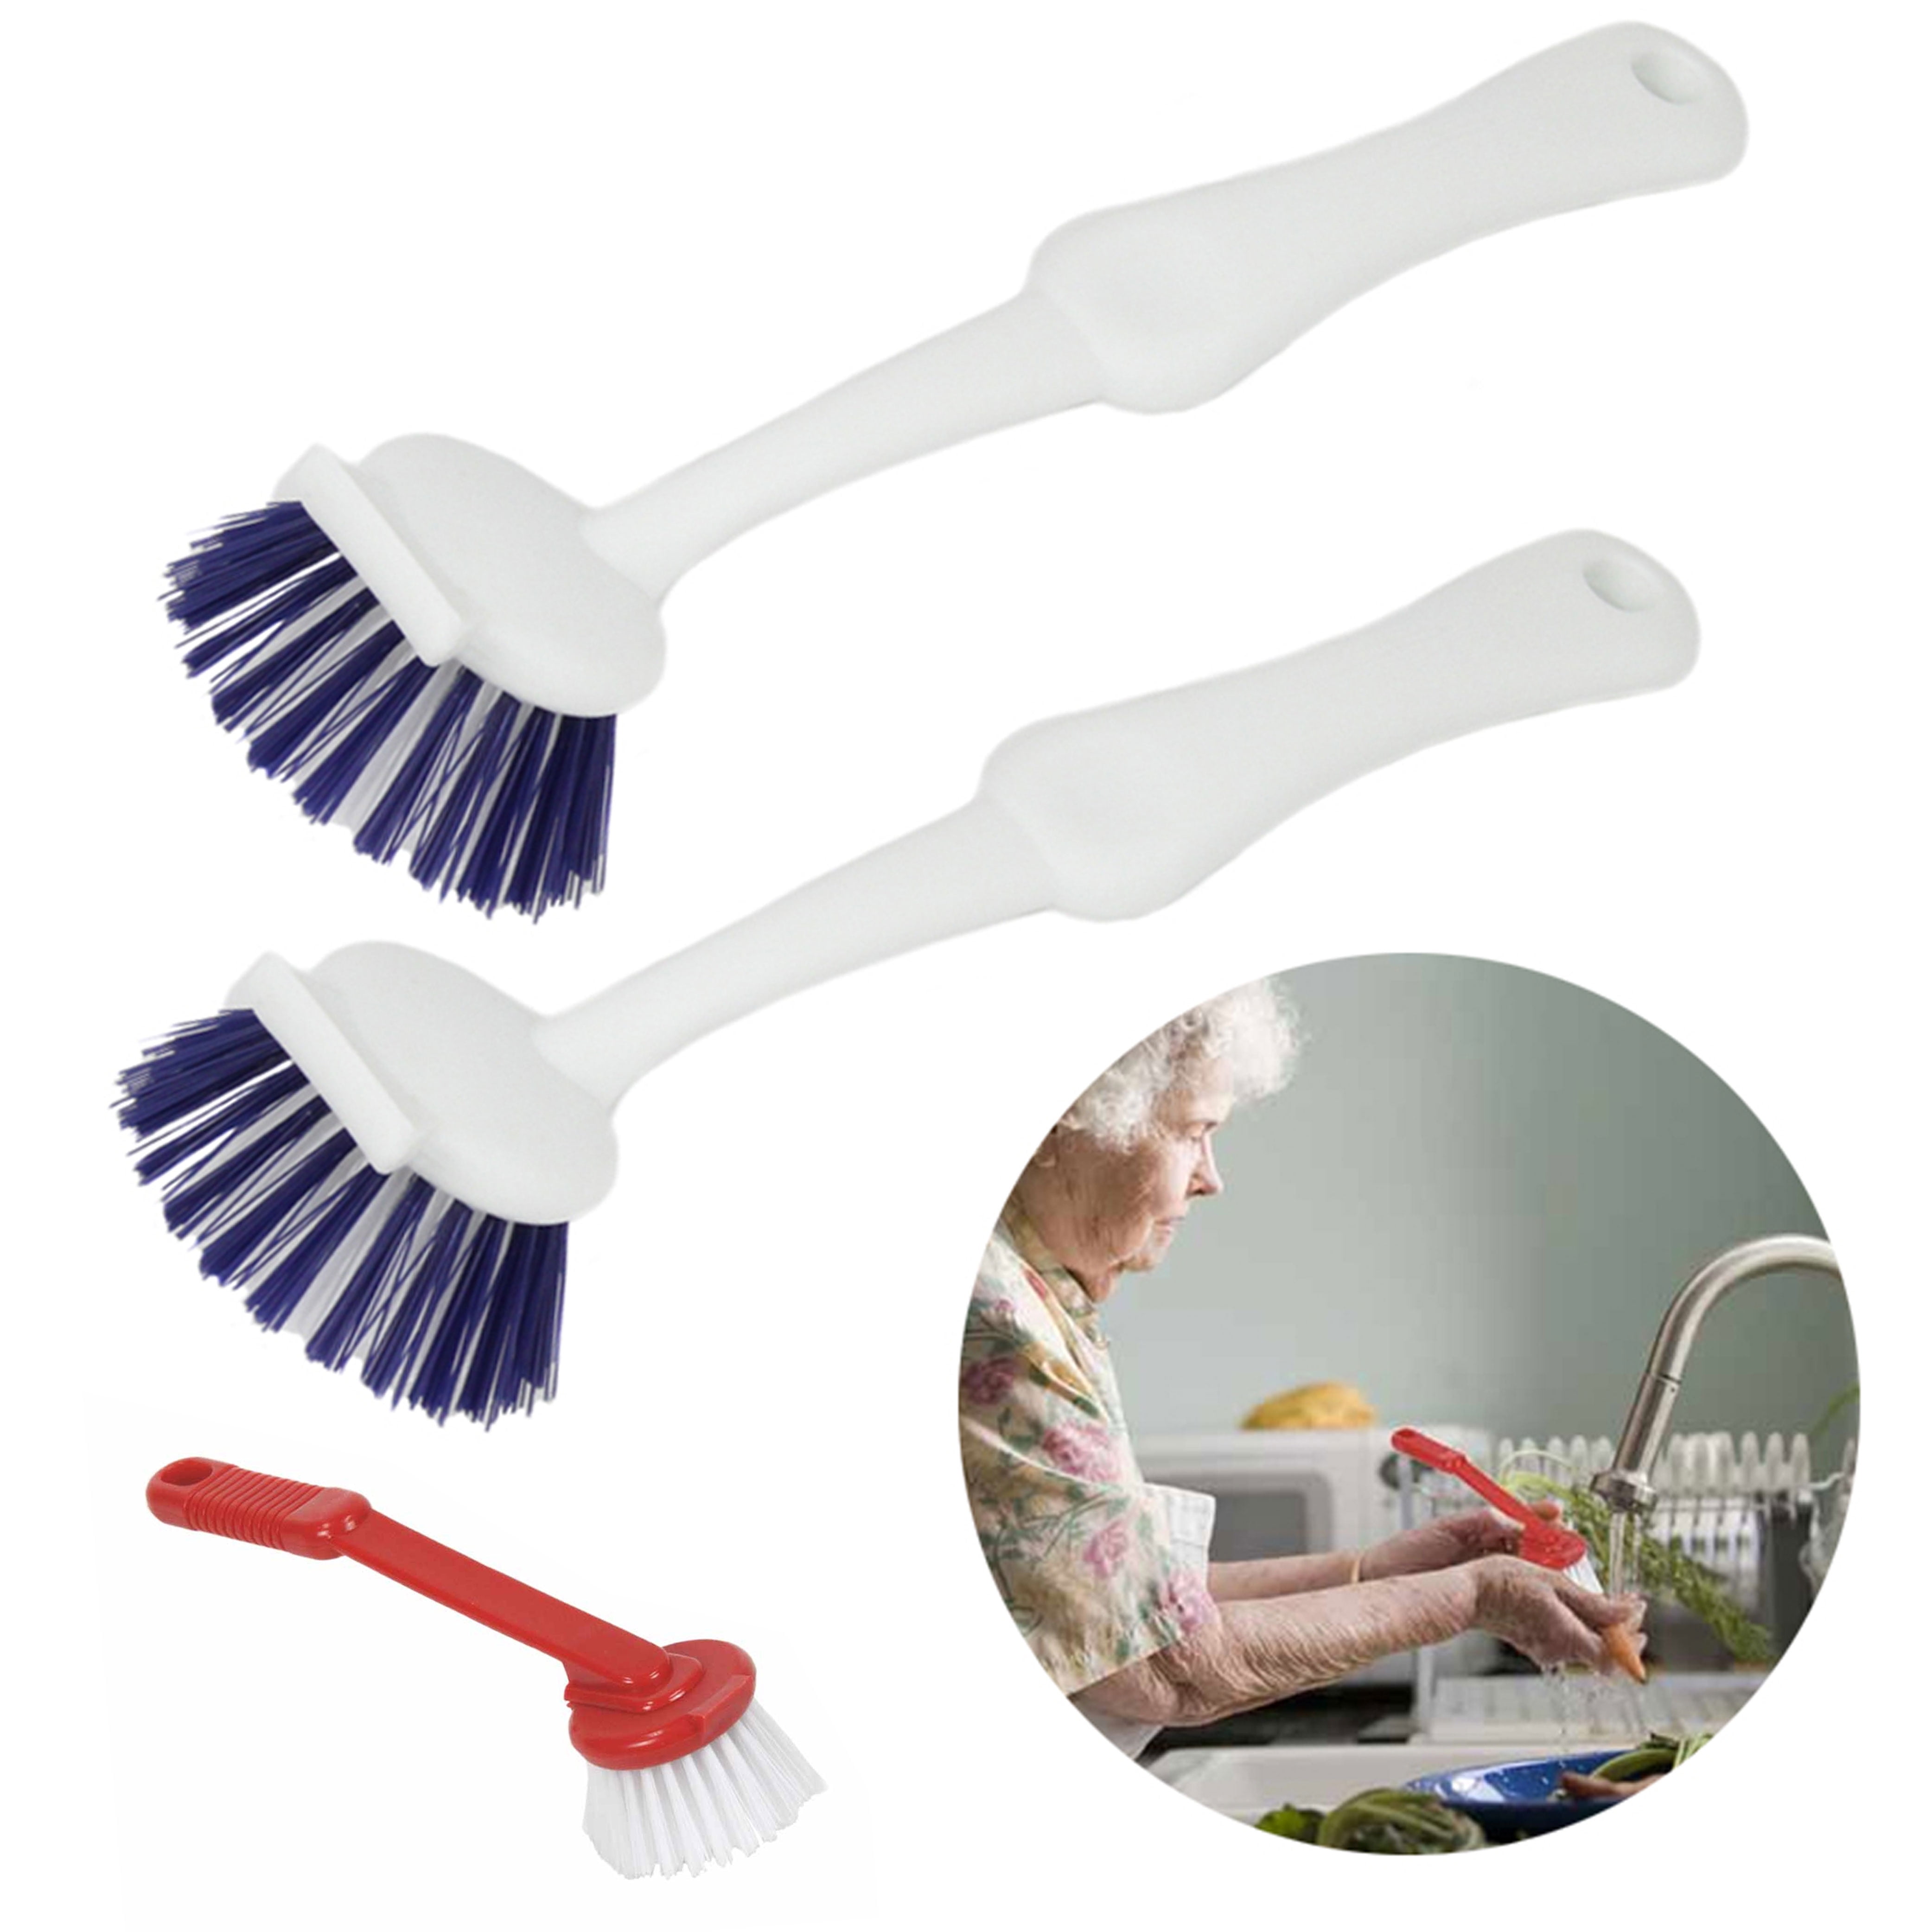 4 PC Scrub Brush Standing Suction Cup Sink Scrubber Dish Kitchen Gadgets  Washing, 1 - Baker's